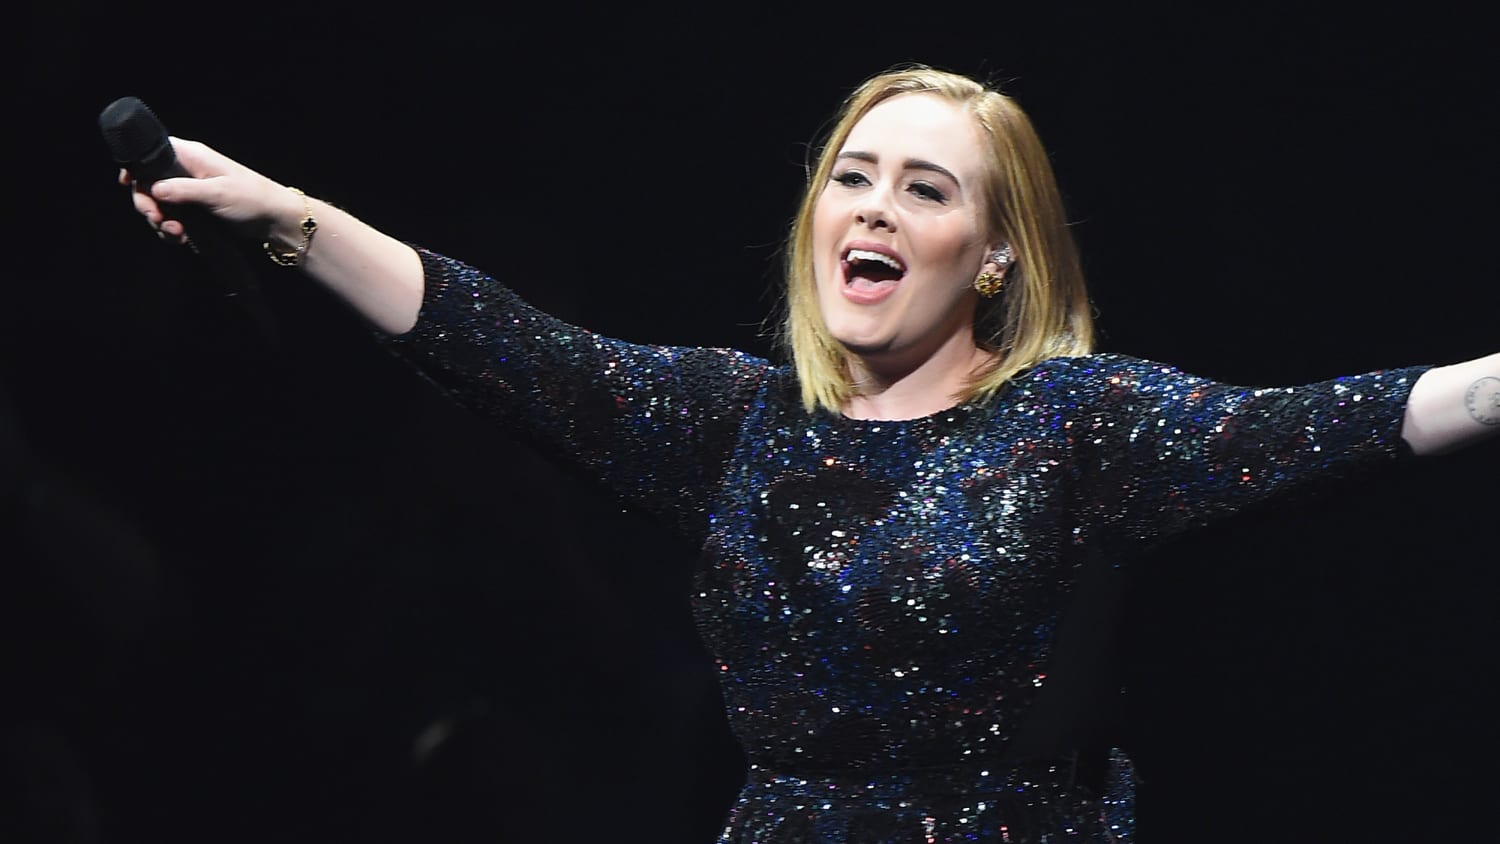 Adele shares sweet message from home after tour: 'Mummy you did it!' - TODAY.com